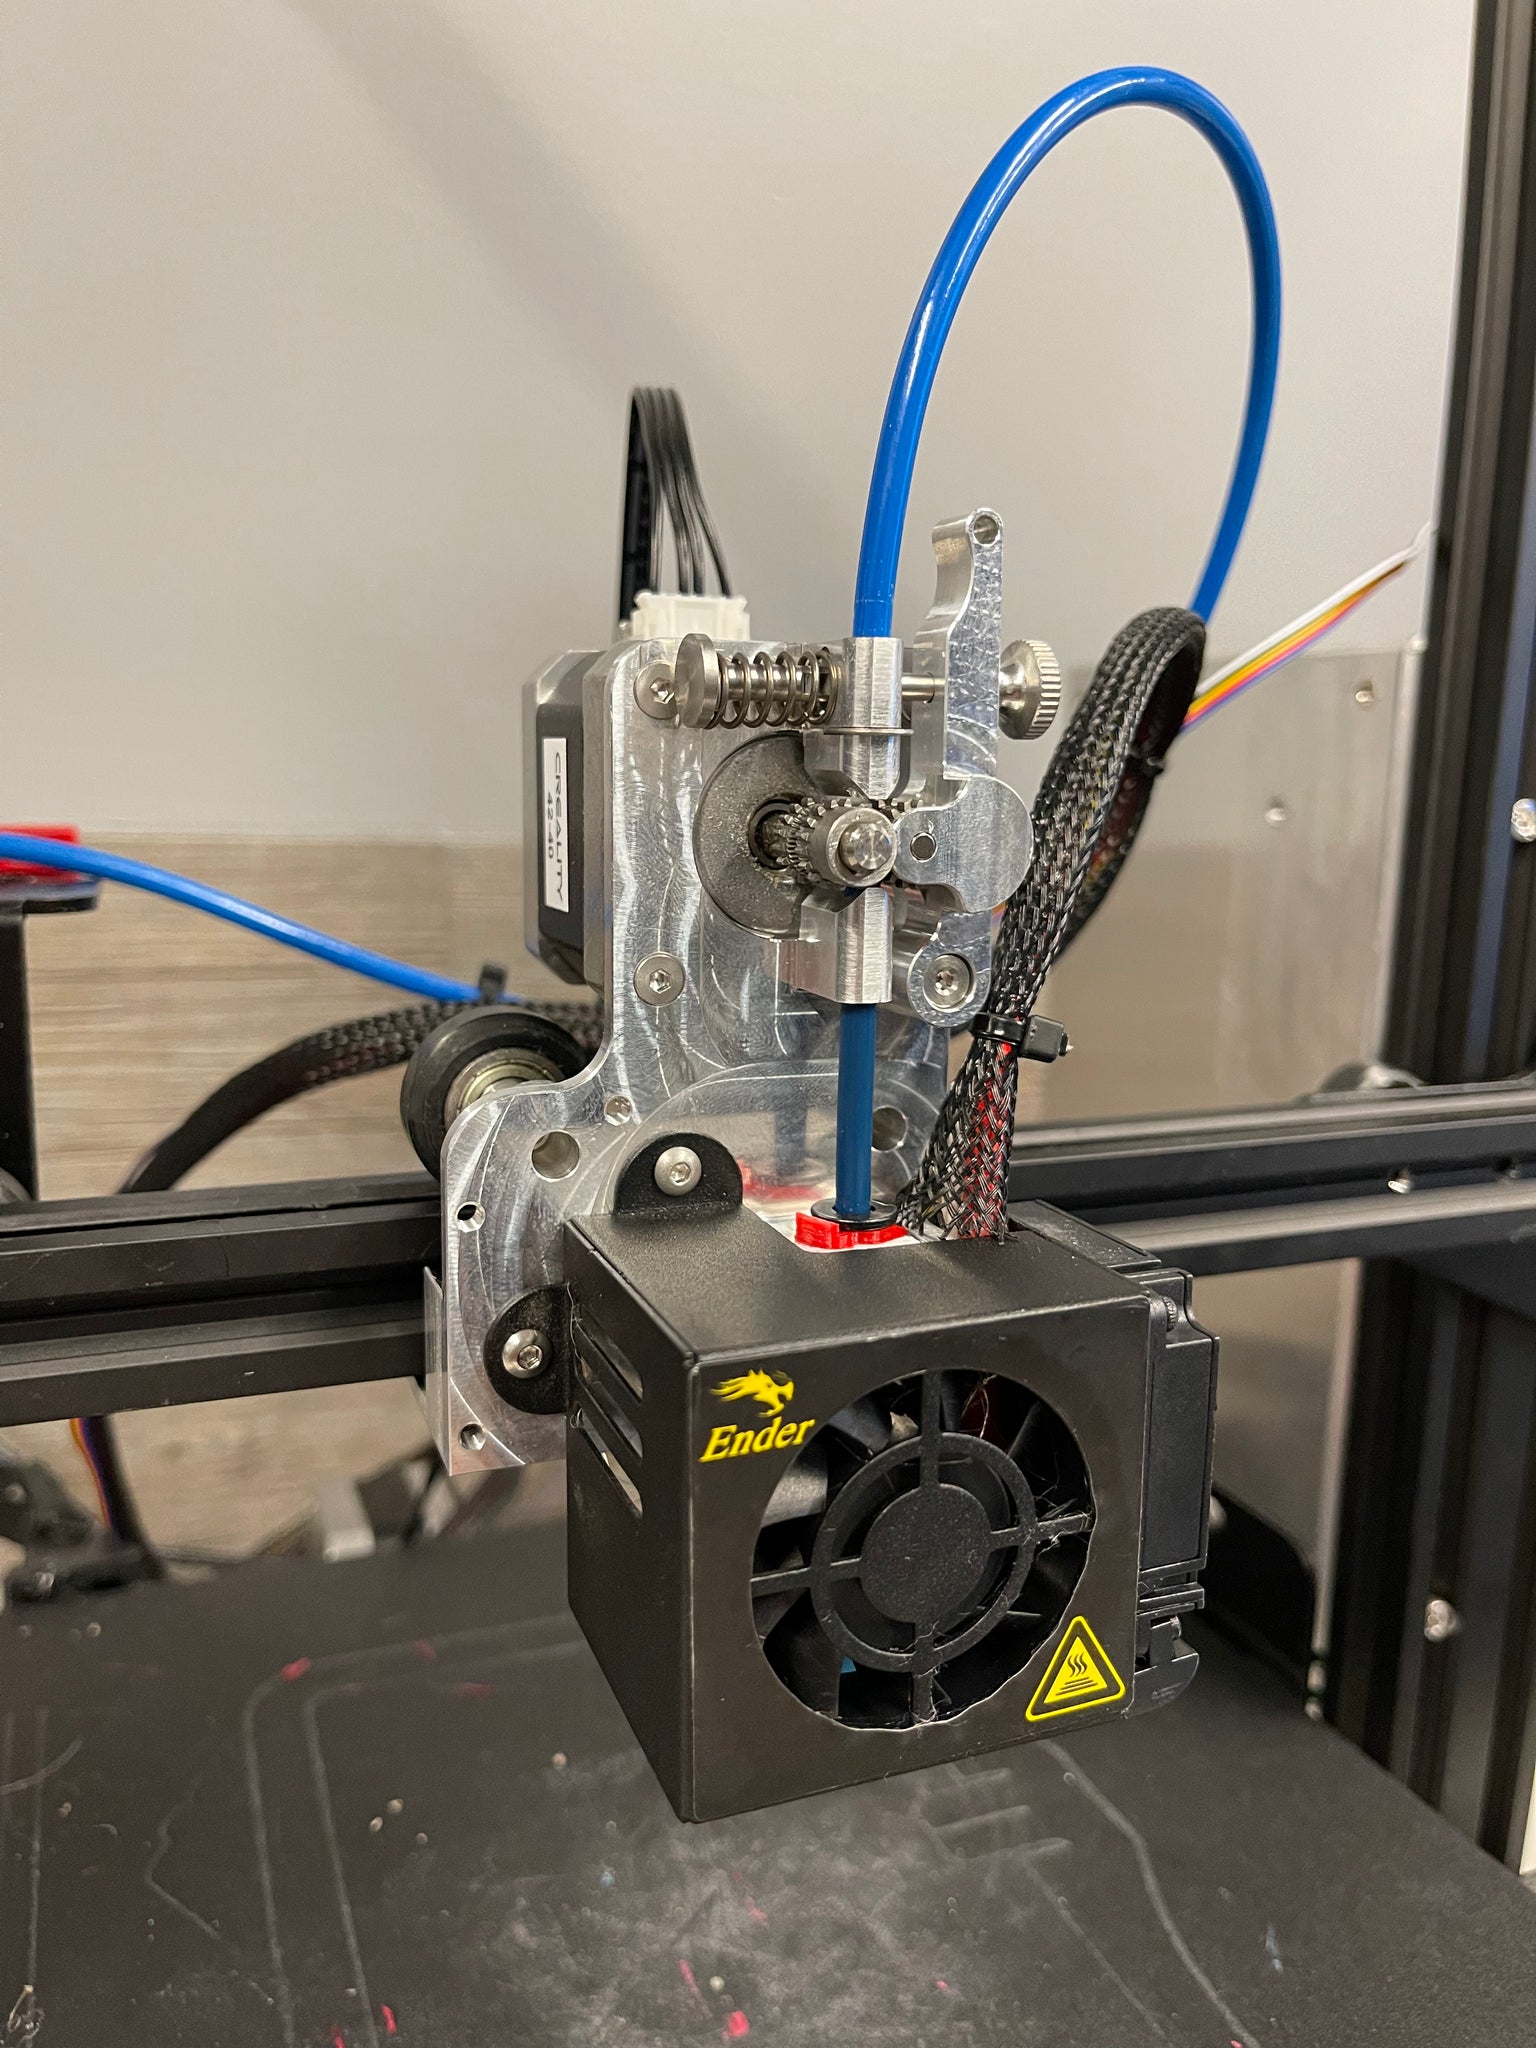 Micro Swiss NG™ Direct Drive Extruder for Creality CR-10 / Ender 3 Printers